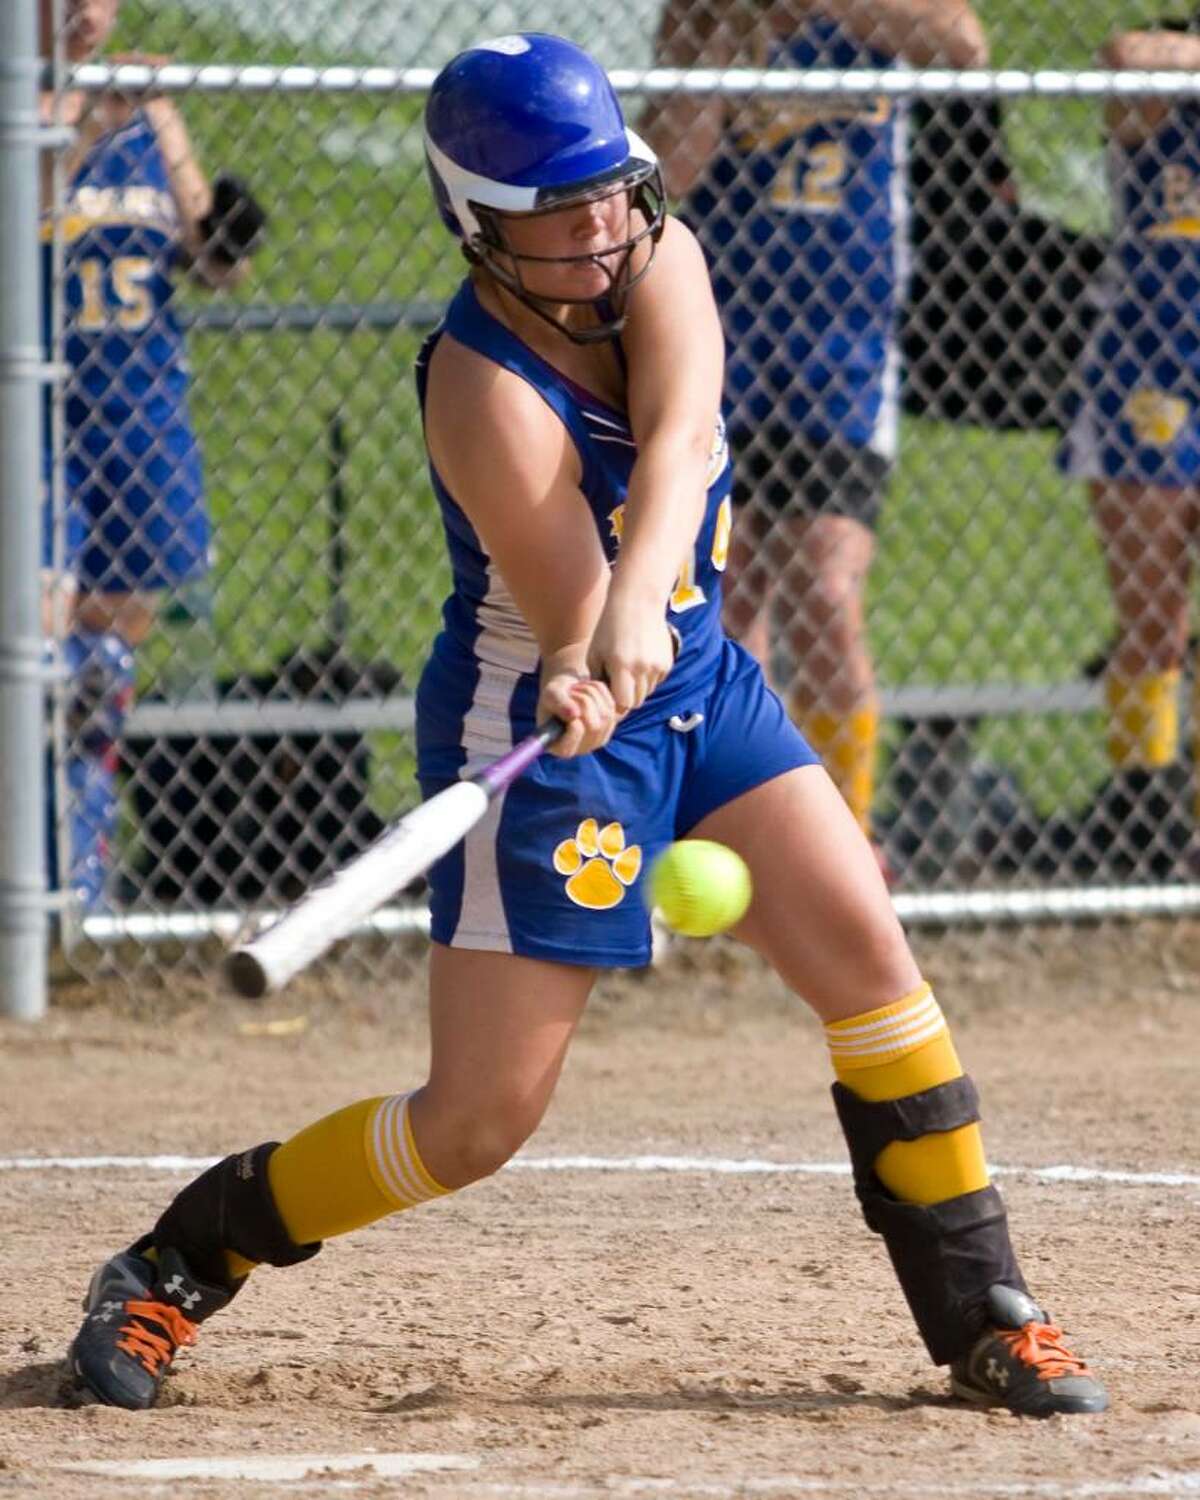 Brookfield's Stephanie Moss slugs a triple which drove in the Bobcats' lone two runs in a 2-1 State Class L tournament quarterfinal win over Windsor Friday at Brookfield High.